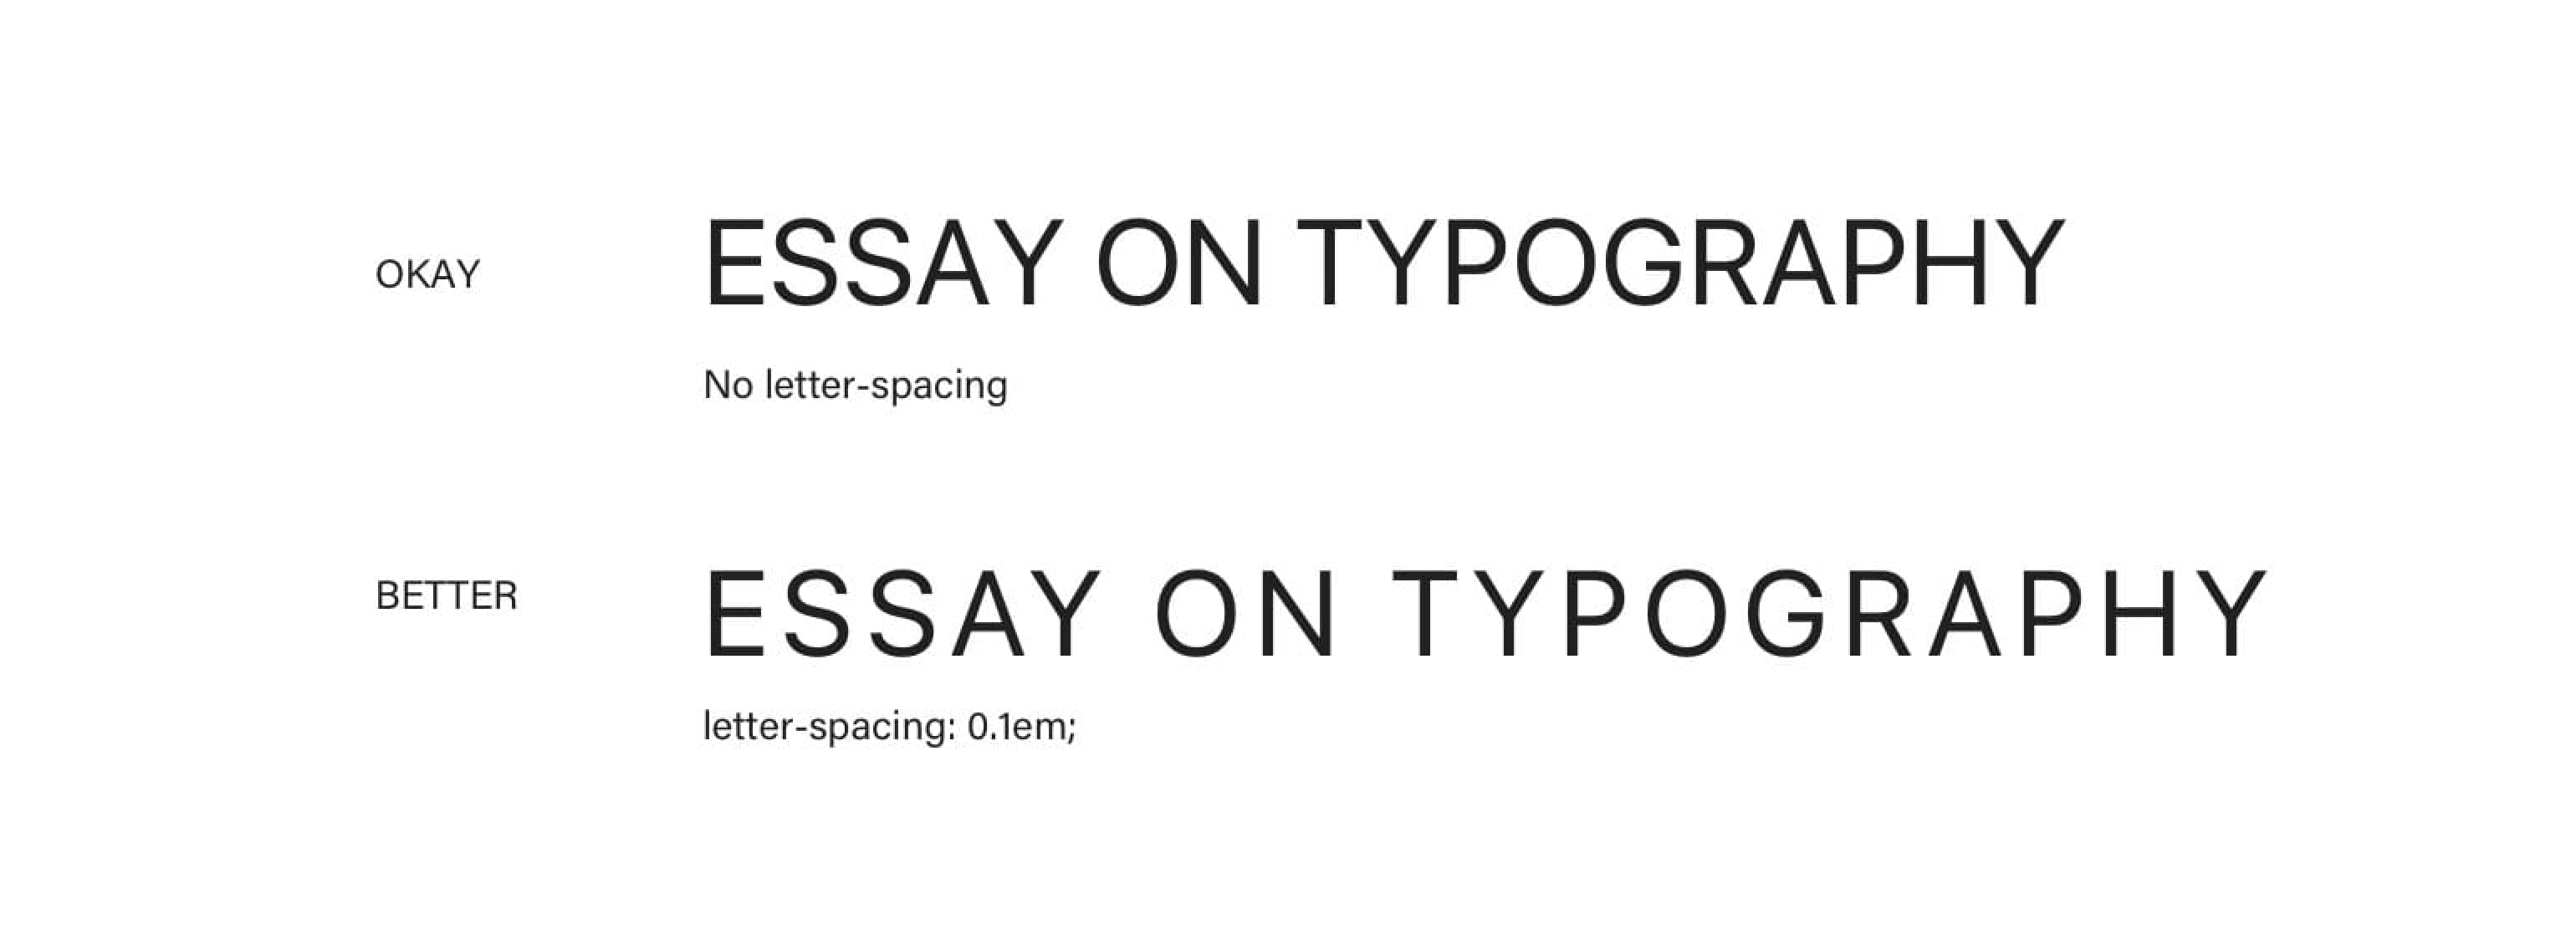 Applying letter spacing to uppercase or small caps helps with legibility.